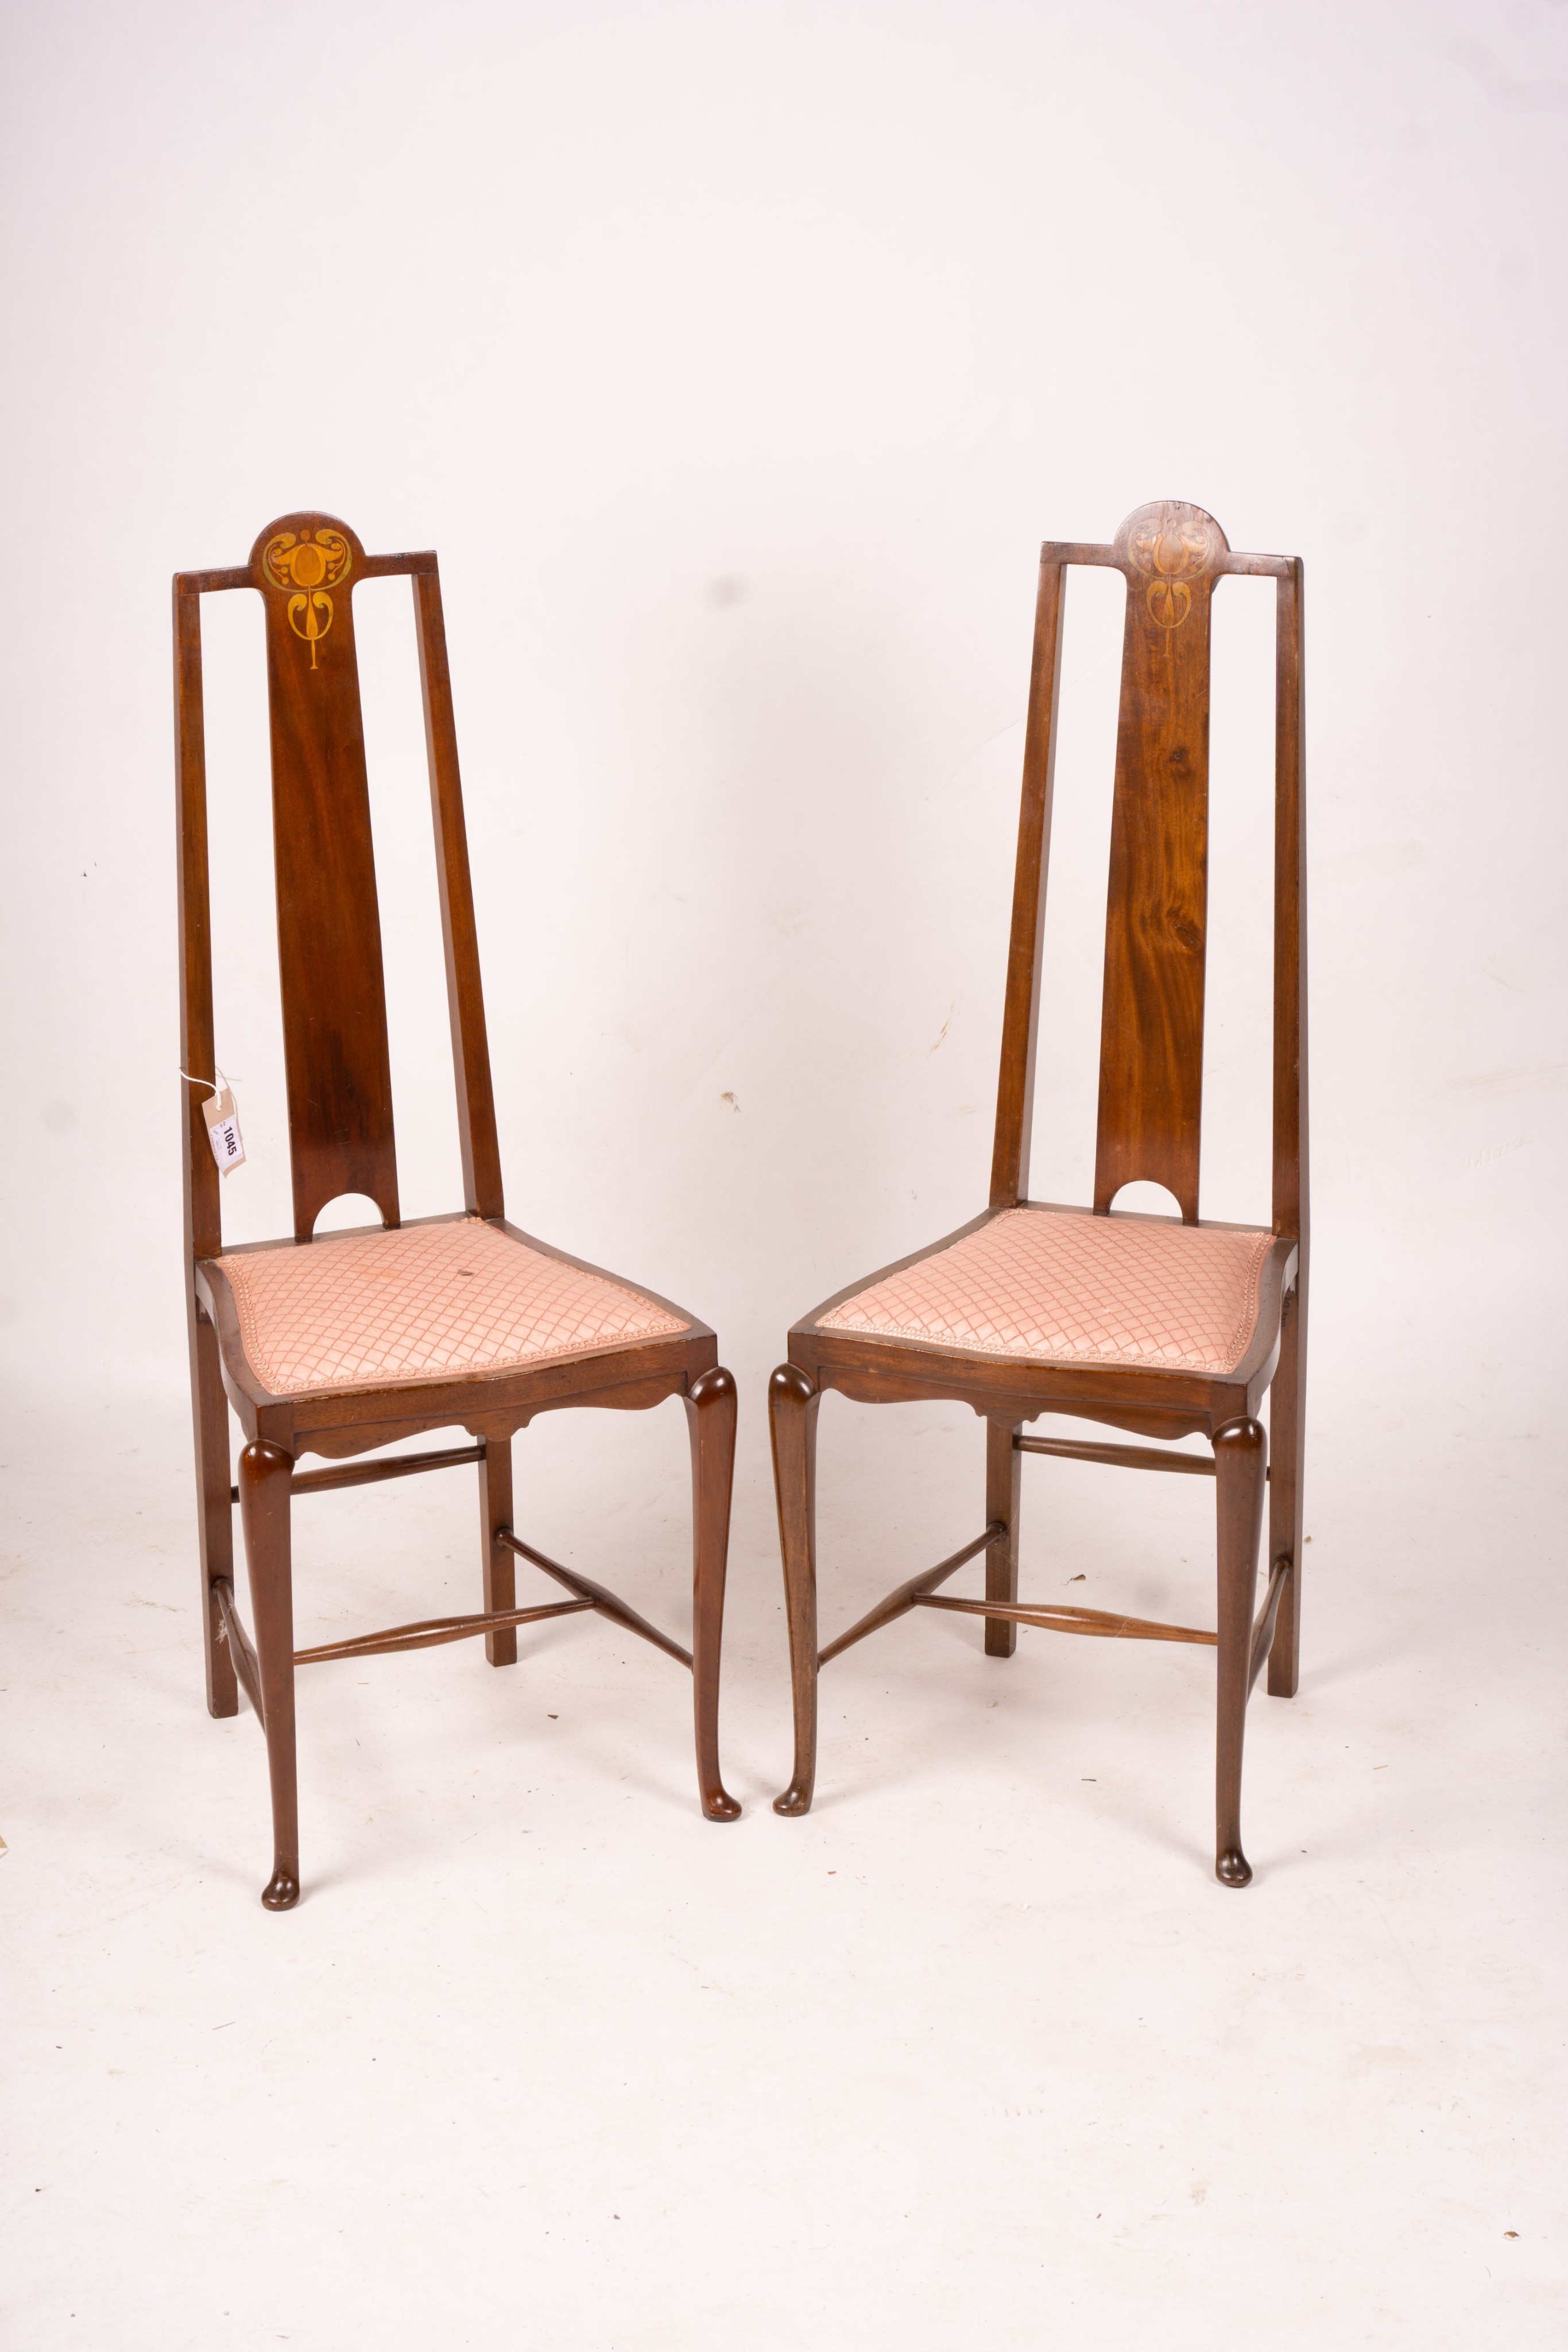 An Edwardian Art Nouveau inlaid mahogany towel rail and a pair of matching salon chairs (3)